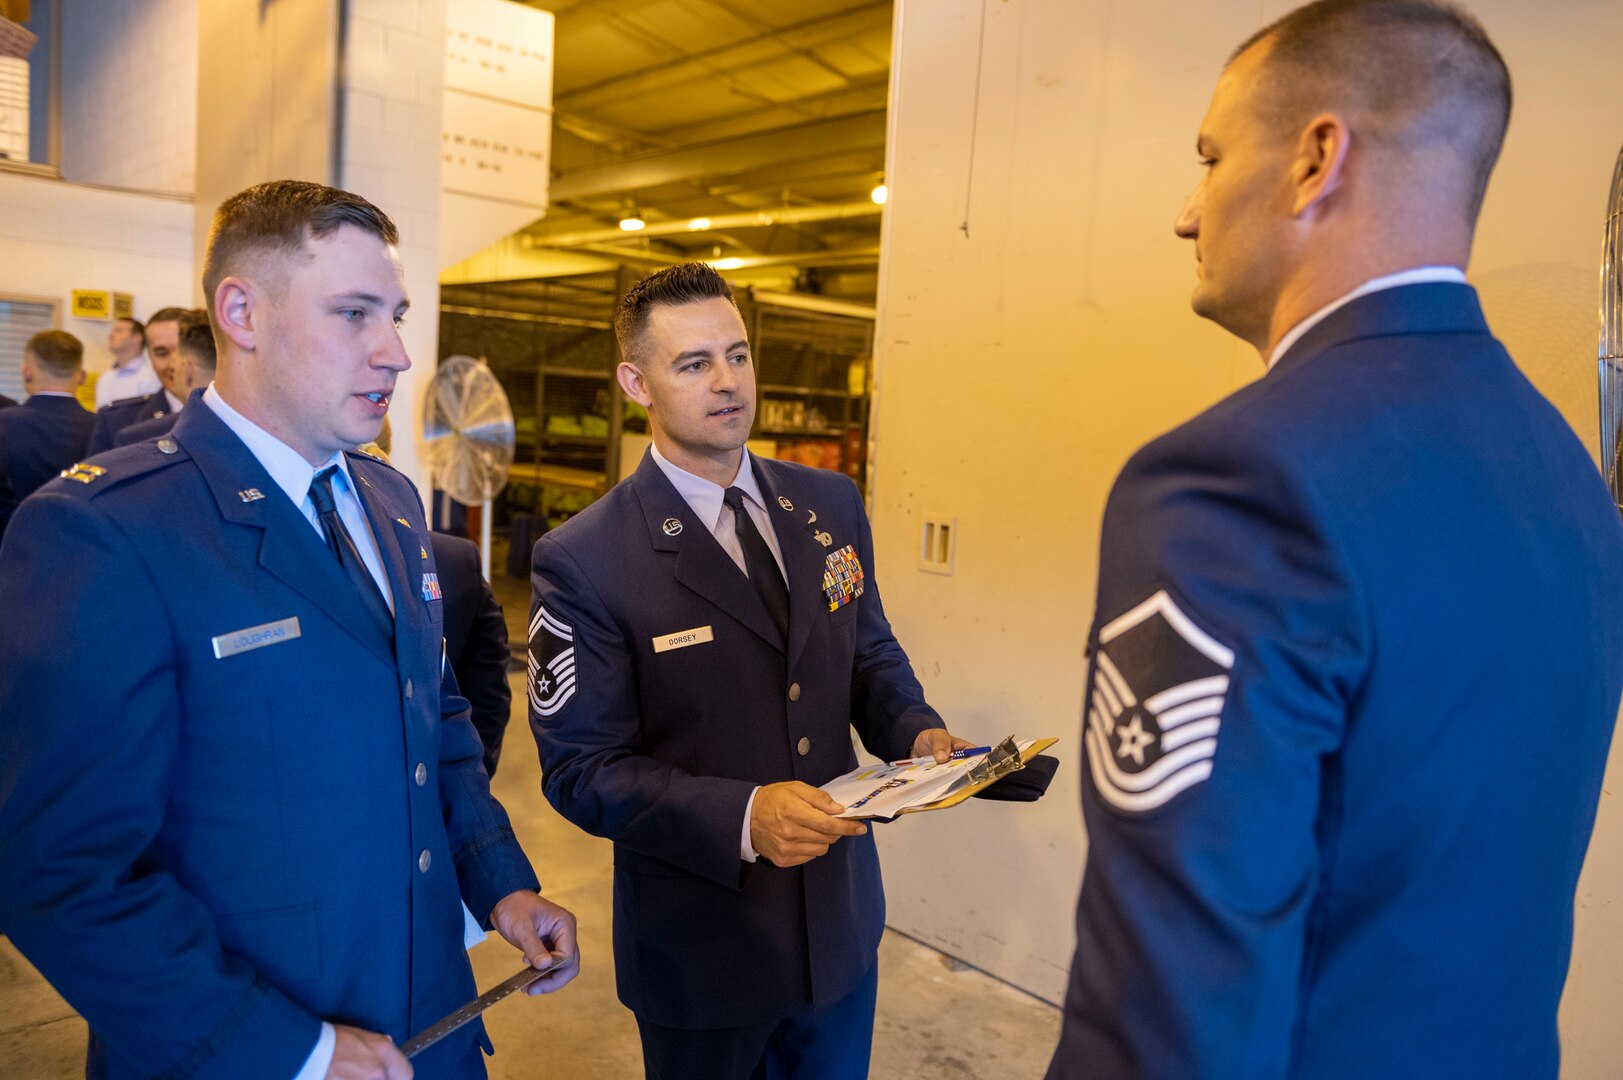 U.S. Air Force Capt. Timothy Loughran, 167th installation deployment officer and Senior Master Sgt. Chad Dorsey, 167th logistics plans and integration superintendent, inspect Master Sgt. Josh Clark, during an open ranks inspection of the deployment and distribution flight at the 167th Airlift Wing, Martinsburg, West Virginia, June 11, 2022. During an open ranks uniform inspection, the service member’s uniform is meticulously examined to ensure adherence to uniform standards.